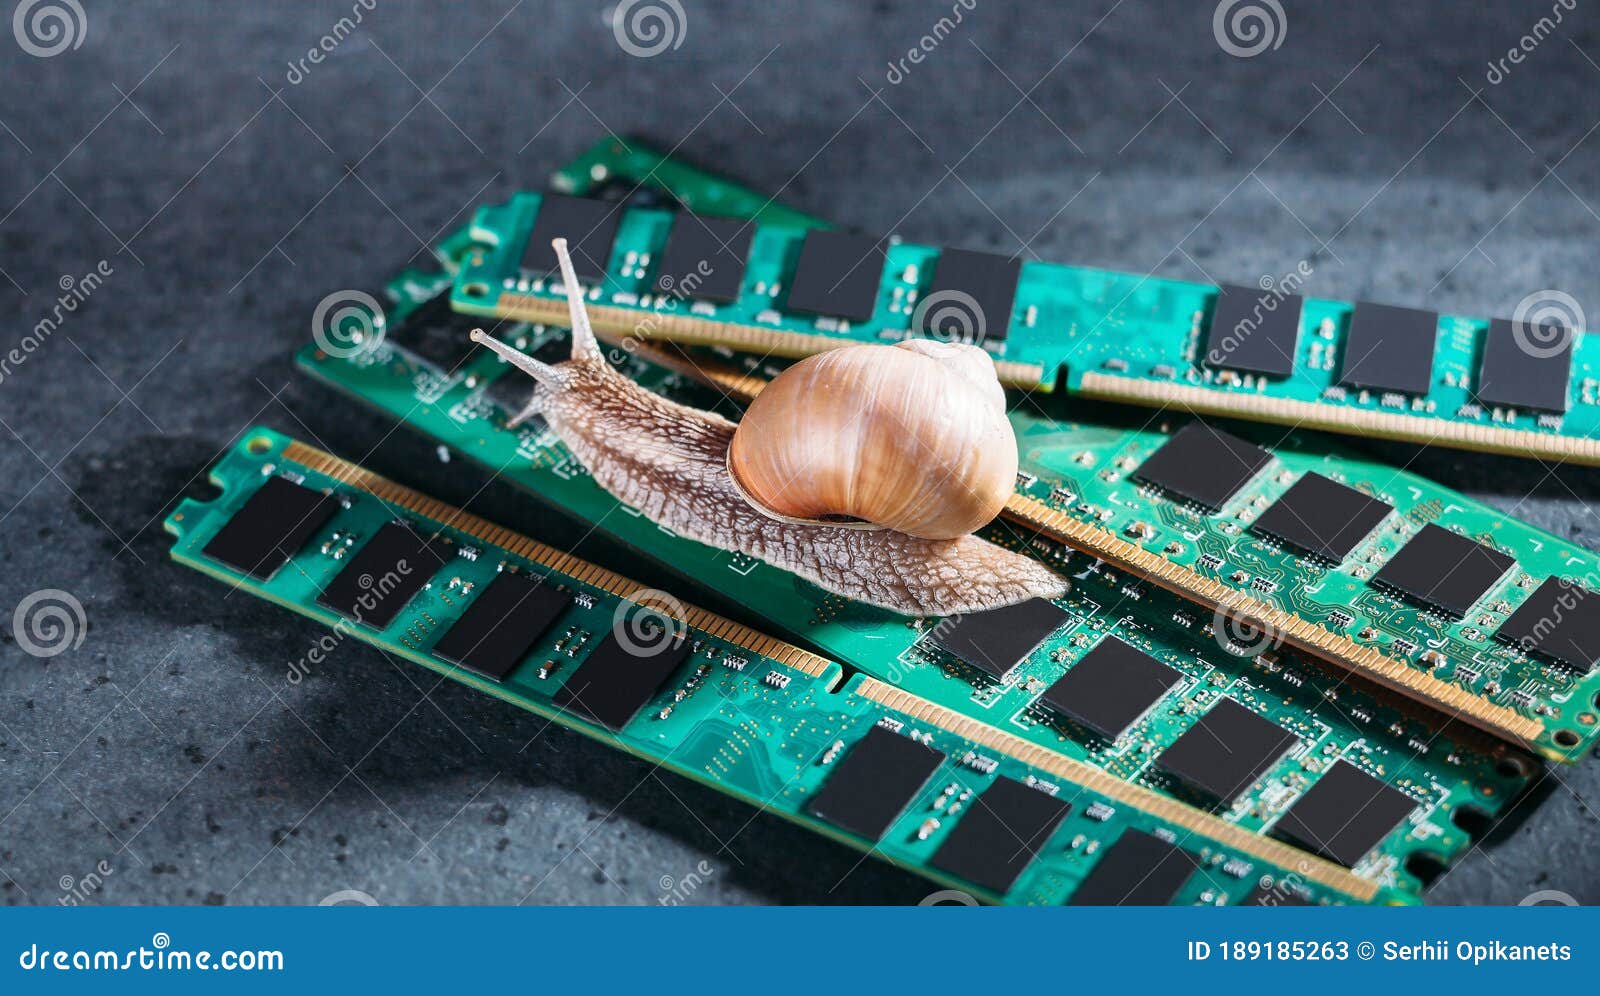 Snail on the Slats of RAM. Old Obsolete Memory. Slow Computer Components Stock Image - Image of module, core: 189185263